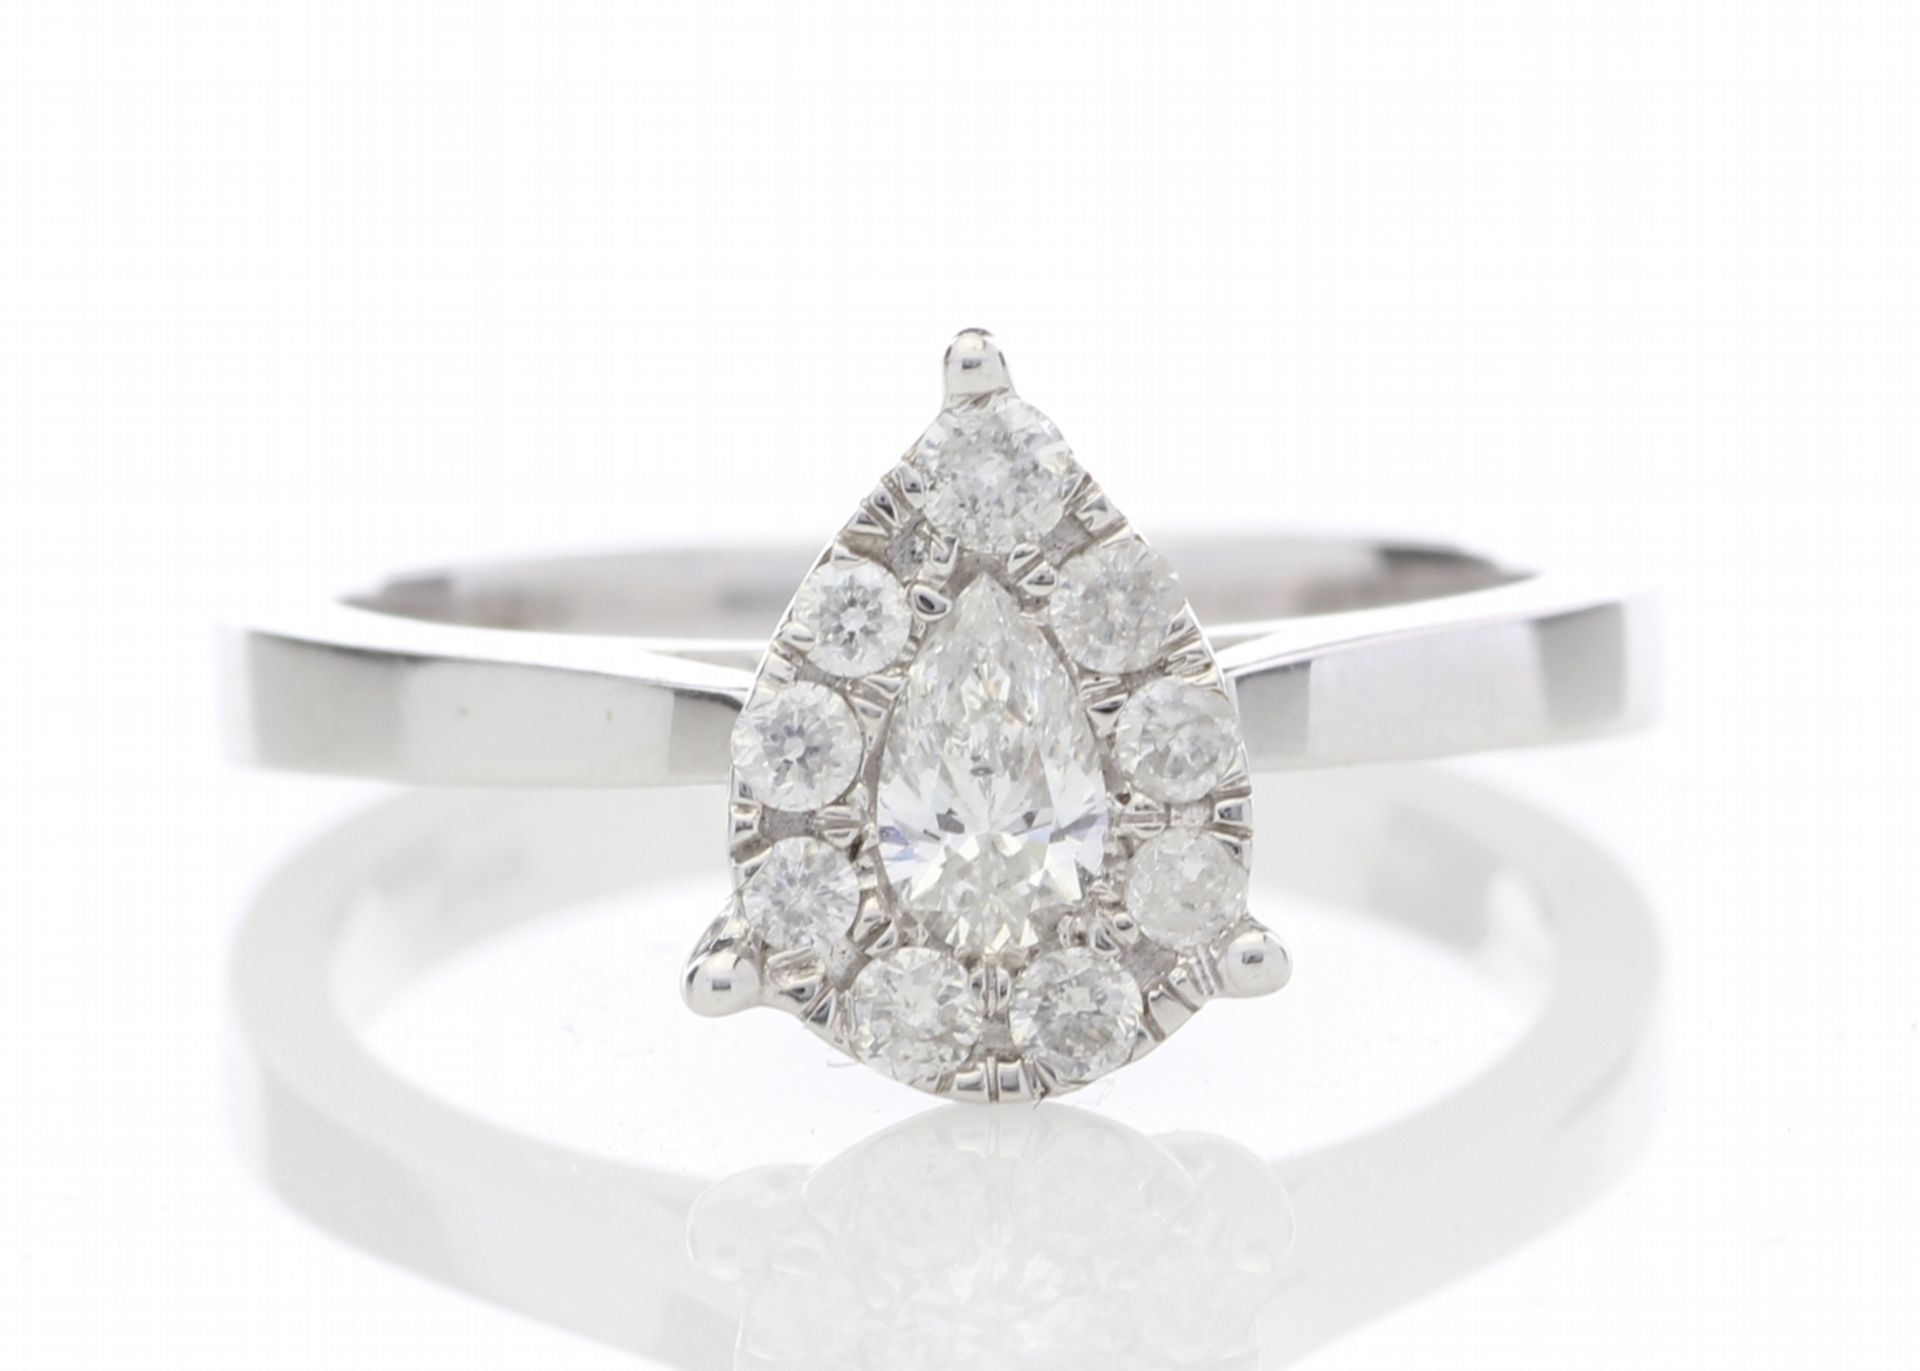 18ct White Gold Pear Cluster Diamond Ring 0.50 Carats - Valued By IDI £6,090.00 - A modern classic